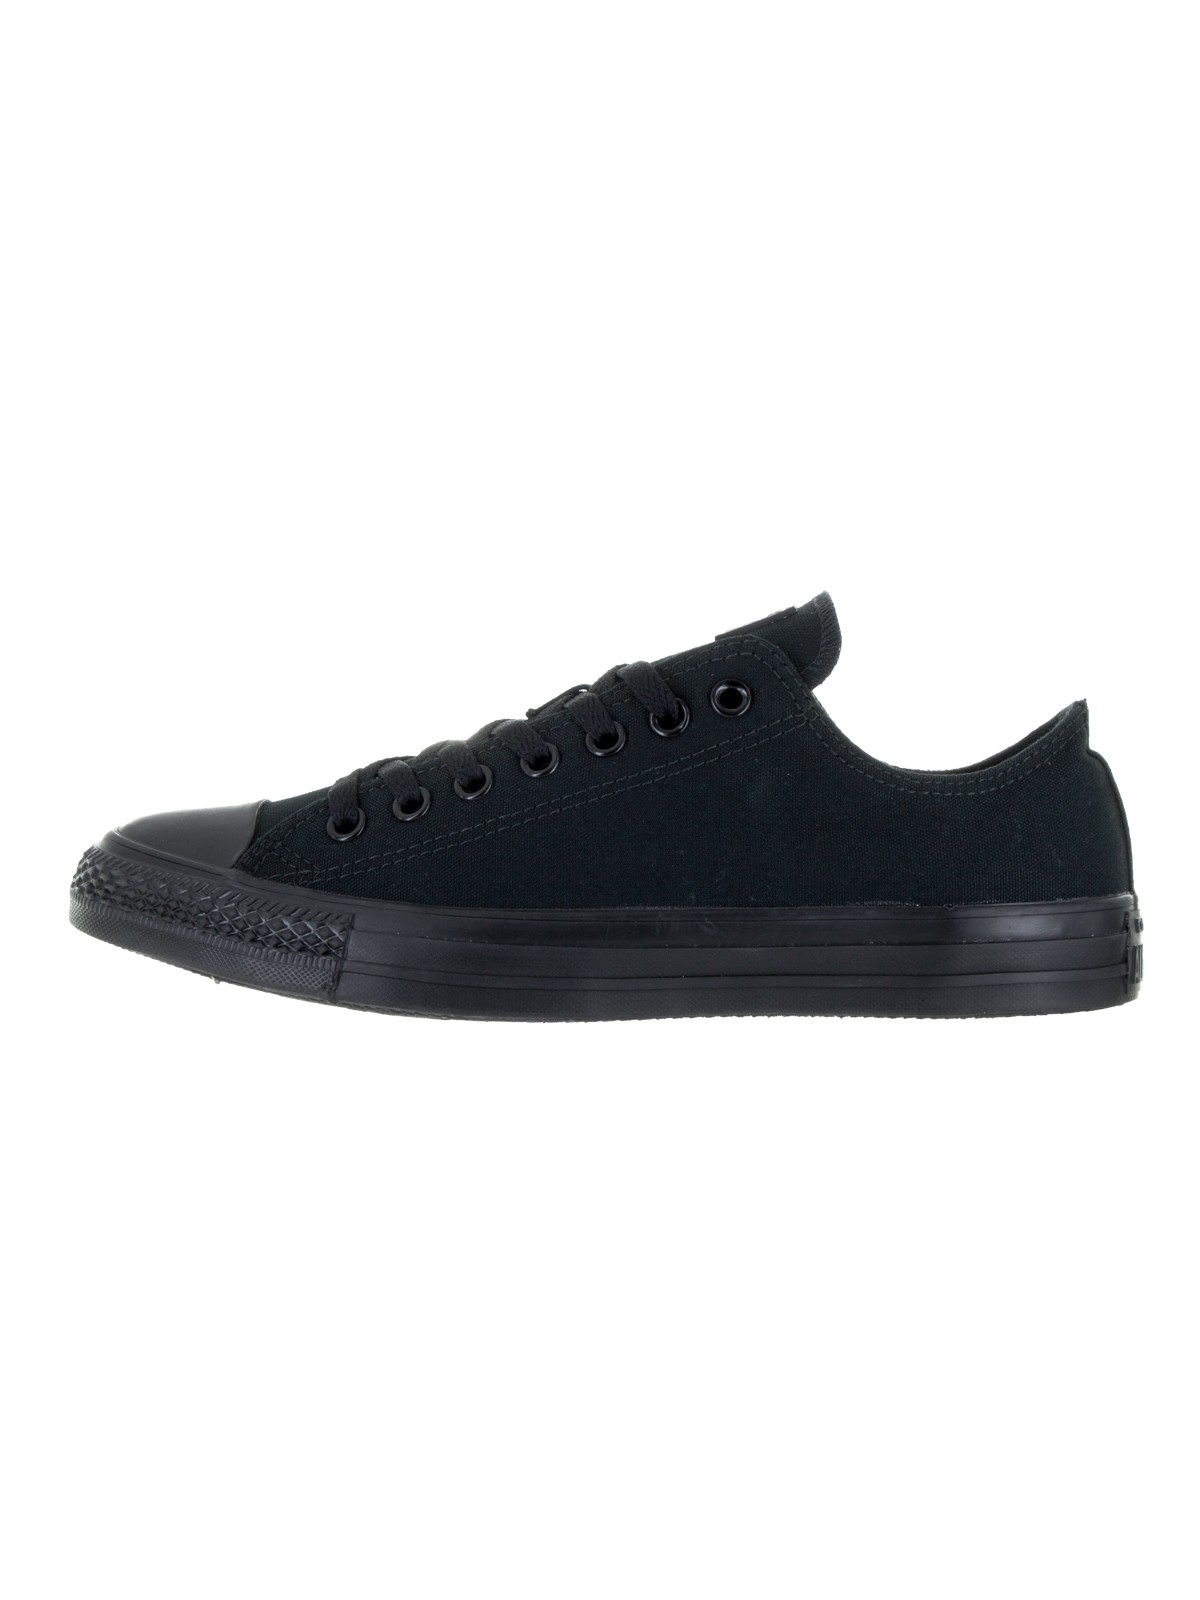 Converse Chuck Taylor All Star Low Sneaker - image 3 of 5